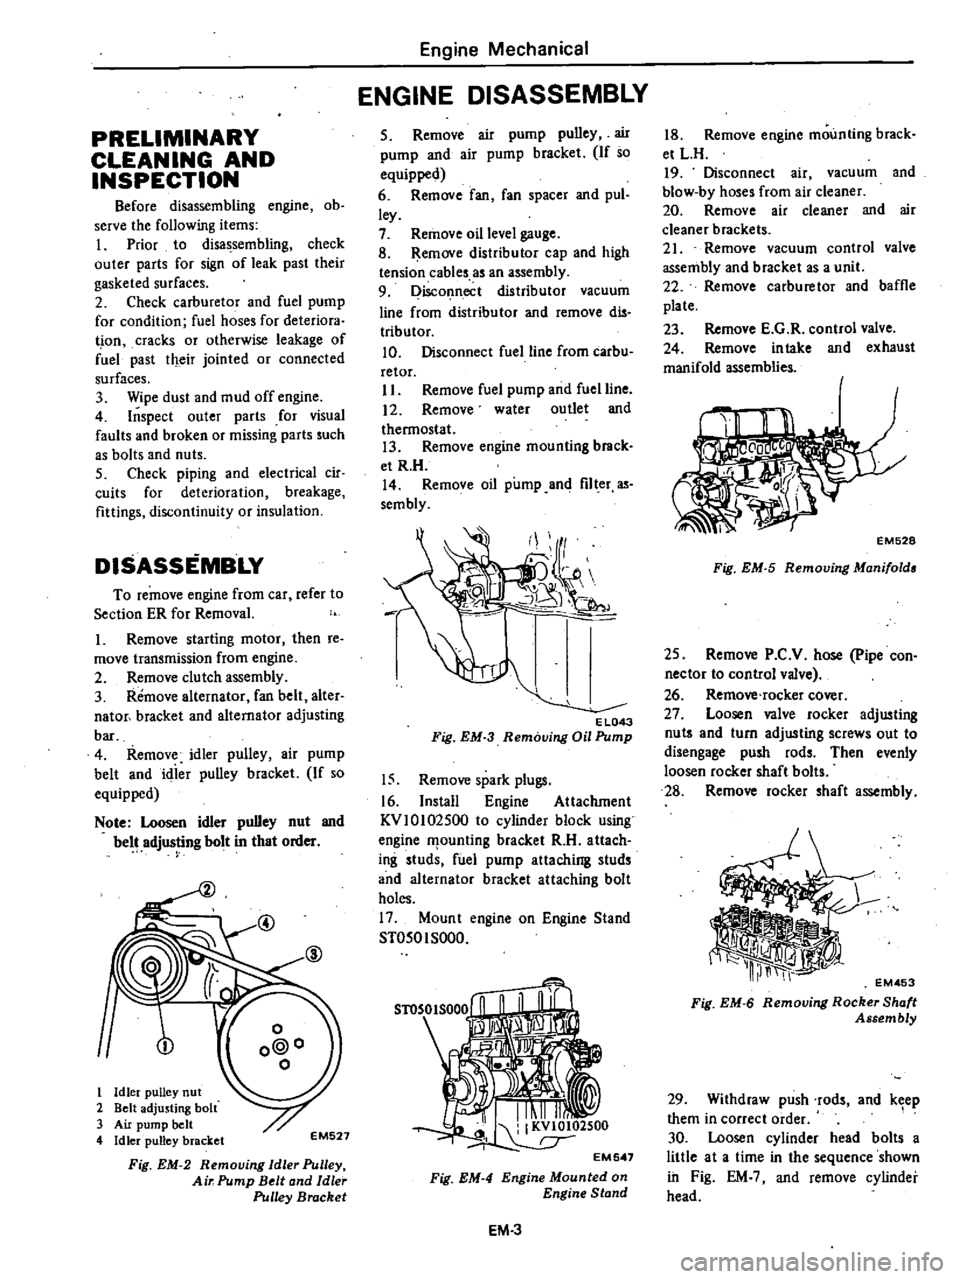 DATSUN 210 1979 Owners Guide 
PRELIMINARY

CLEANING 
AND

INSPECTION

Before

disassembling 
engine 
ob

serve 
the 
following 
items

I

Prior 
to

disassembling 
check

outer

parts 
for

sign 
of 
leak

past 
their

gasketed 
